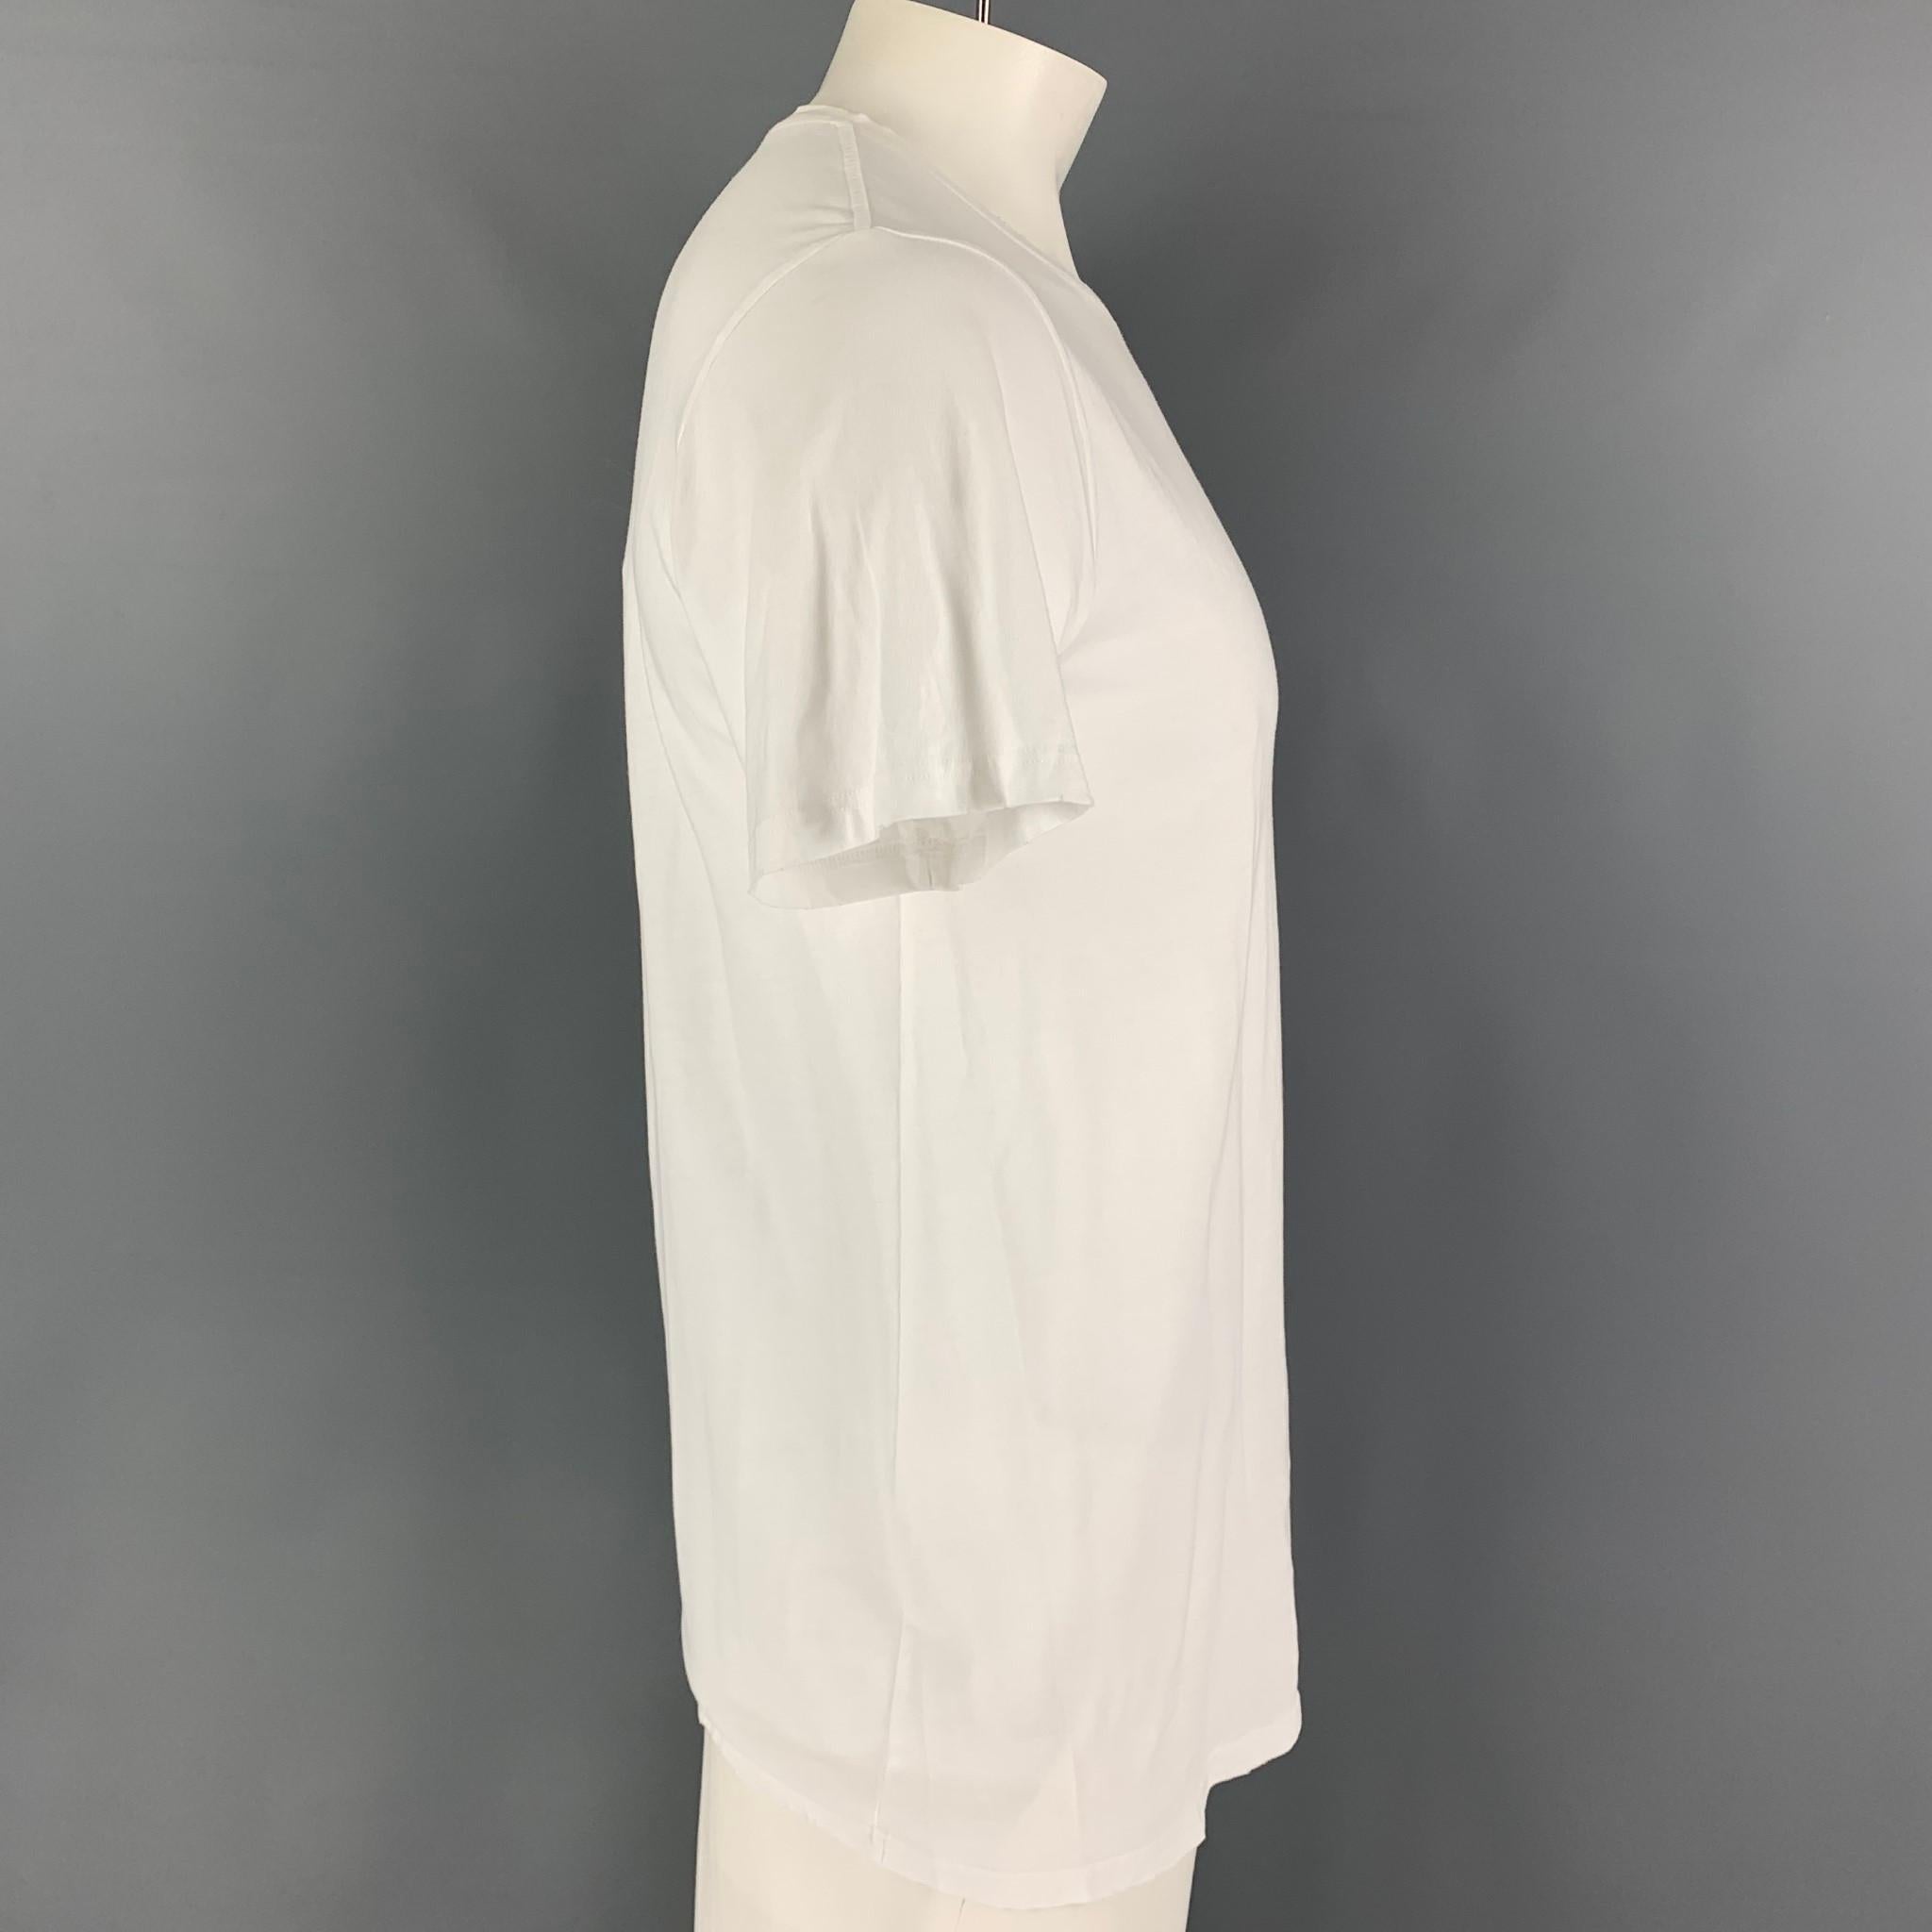 BALMAIN t-shirt comes in a white cotton featuring distressed details, slim fit, and a crew-neck. Made in Italy. 

Excellent Pre-Owned Condition.
Marked: XL

Measurements:

Shoulder: 18 in.
Chest: 40 in.
Sleeve: 8 in.
Length: 28.5 in.